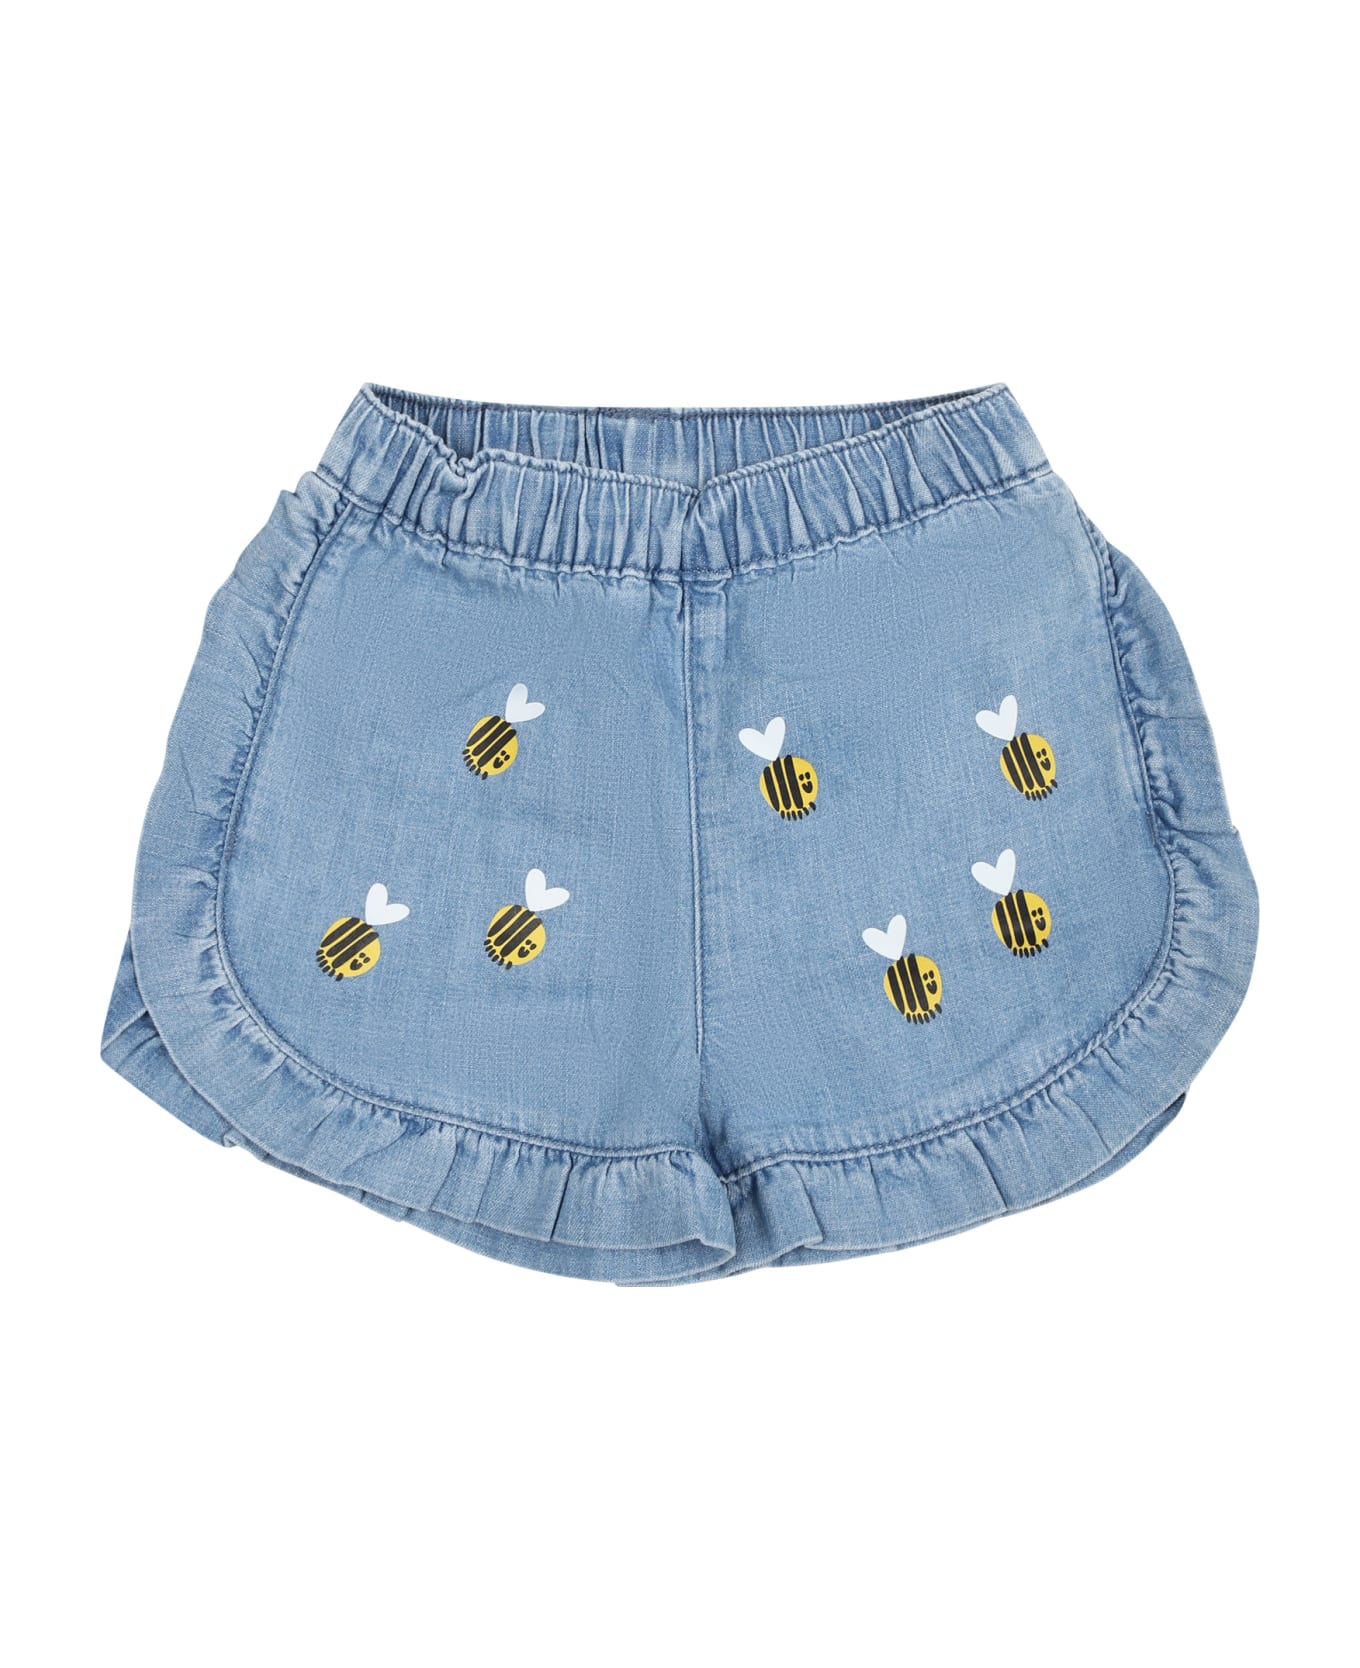 Stella McCartney Kids Blue Shorts For Baby Girl With Beees - Celeste/multicolor